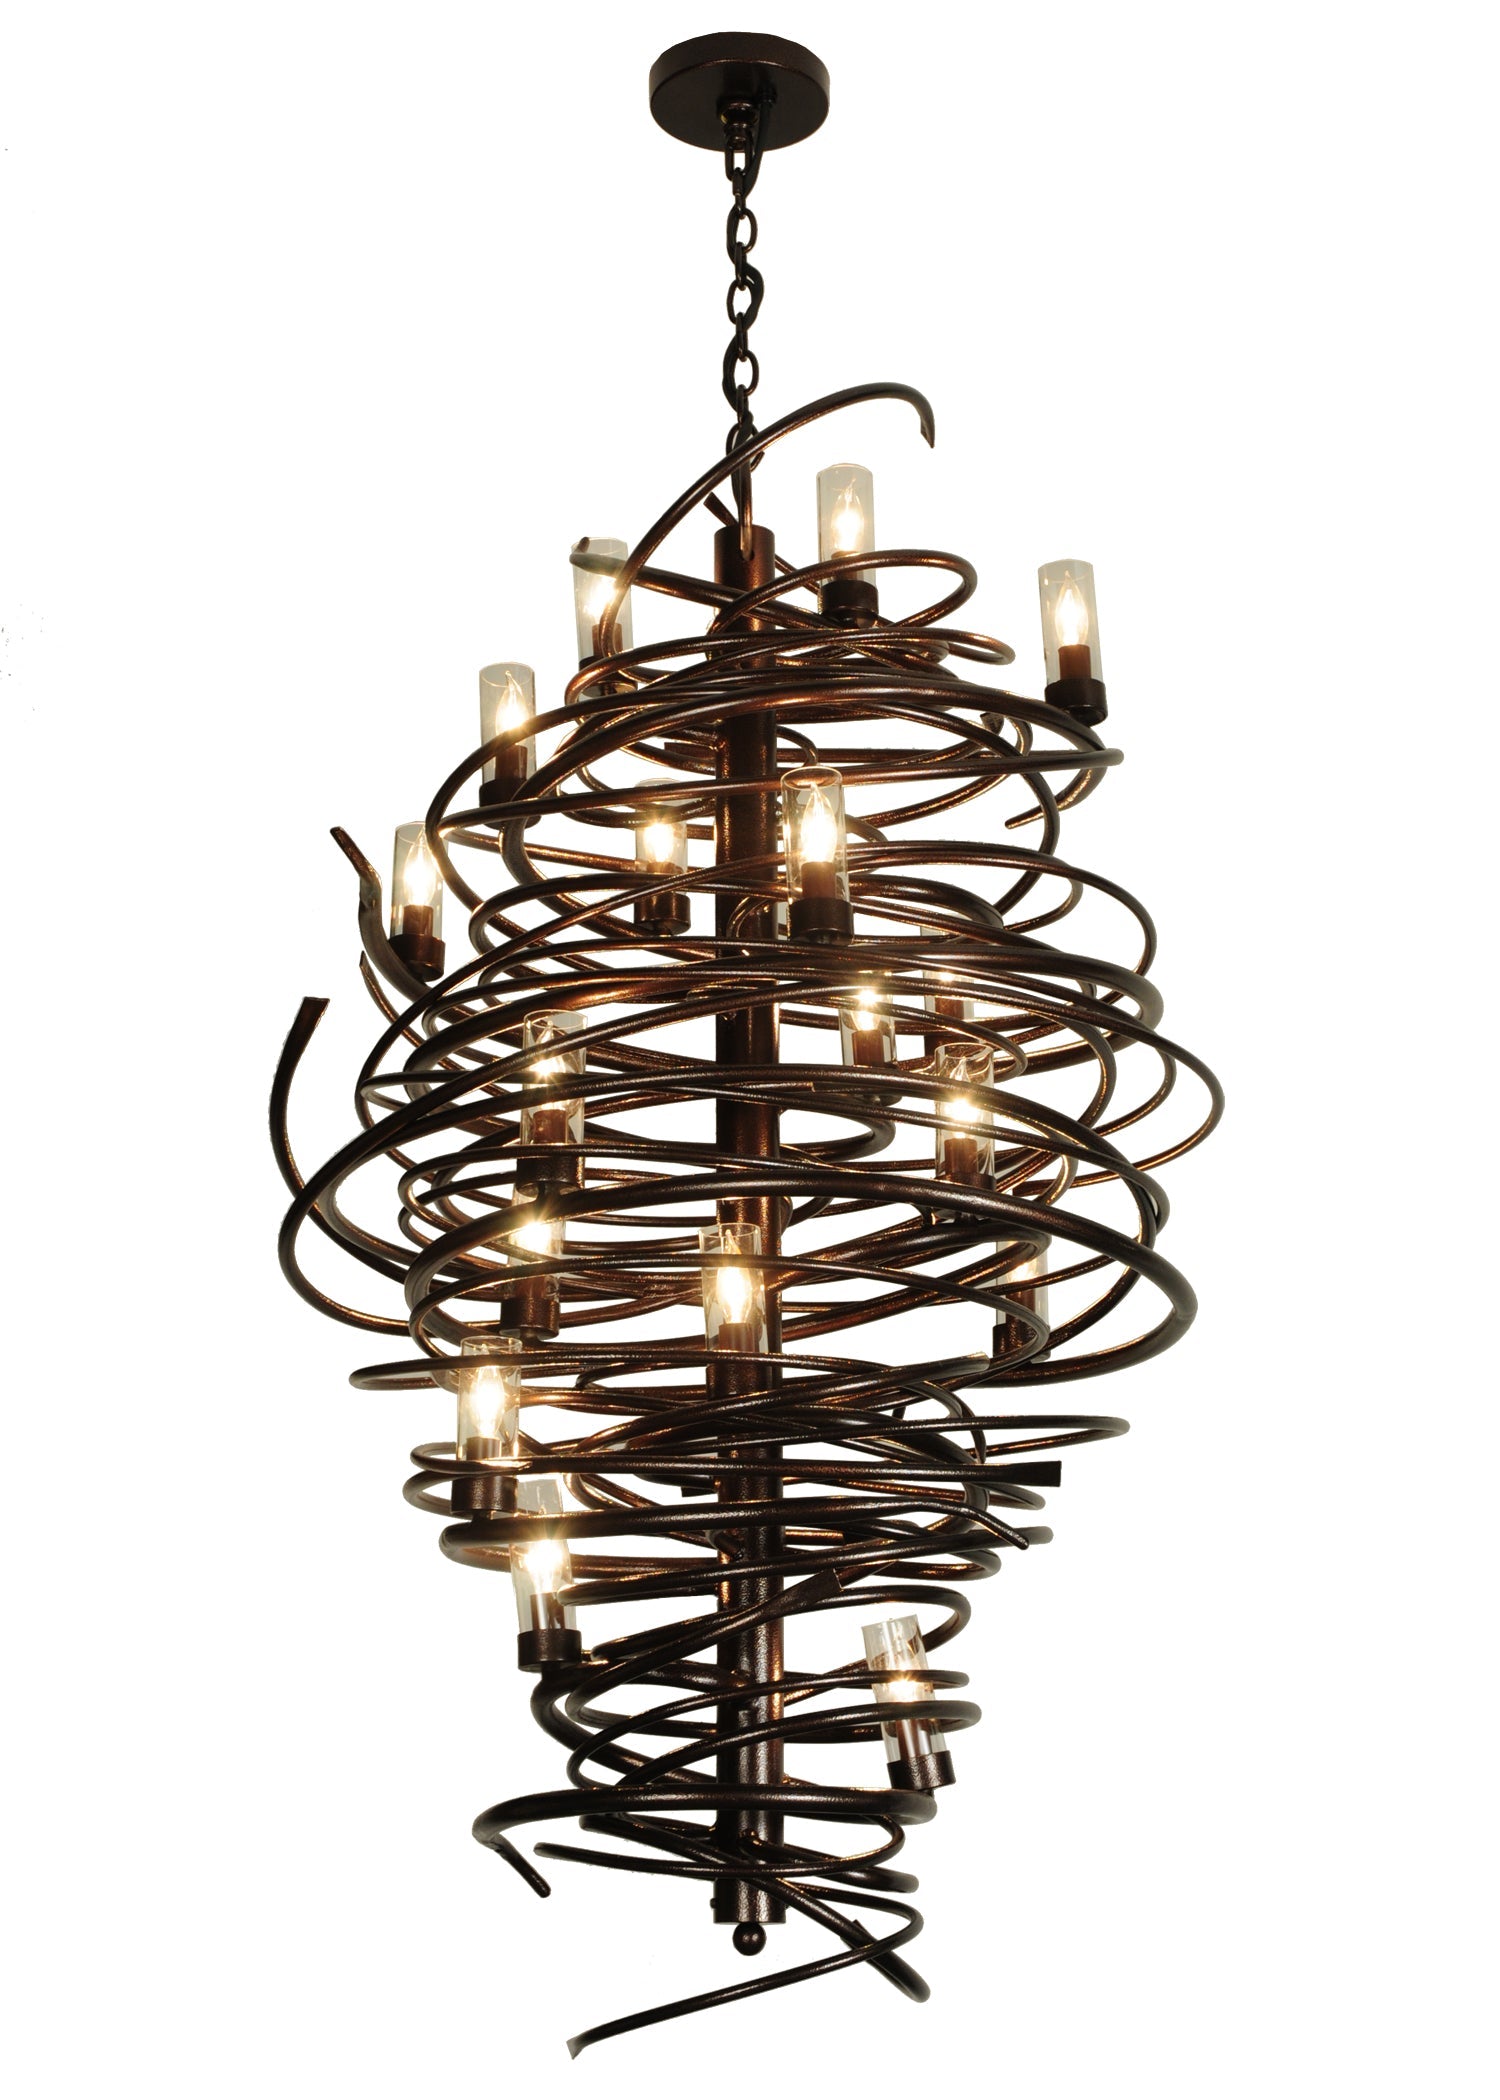 30" Centric 18-Light Chandelier by 2nd Ave Lighting